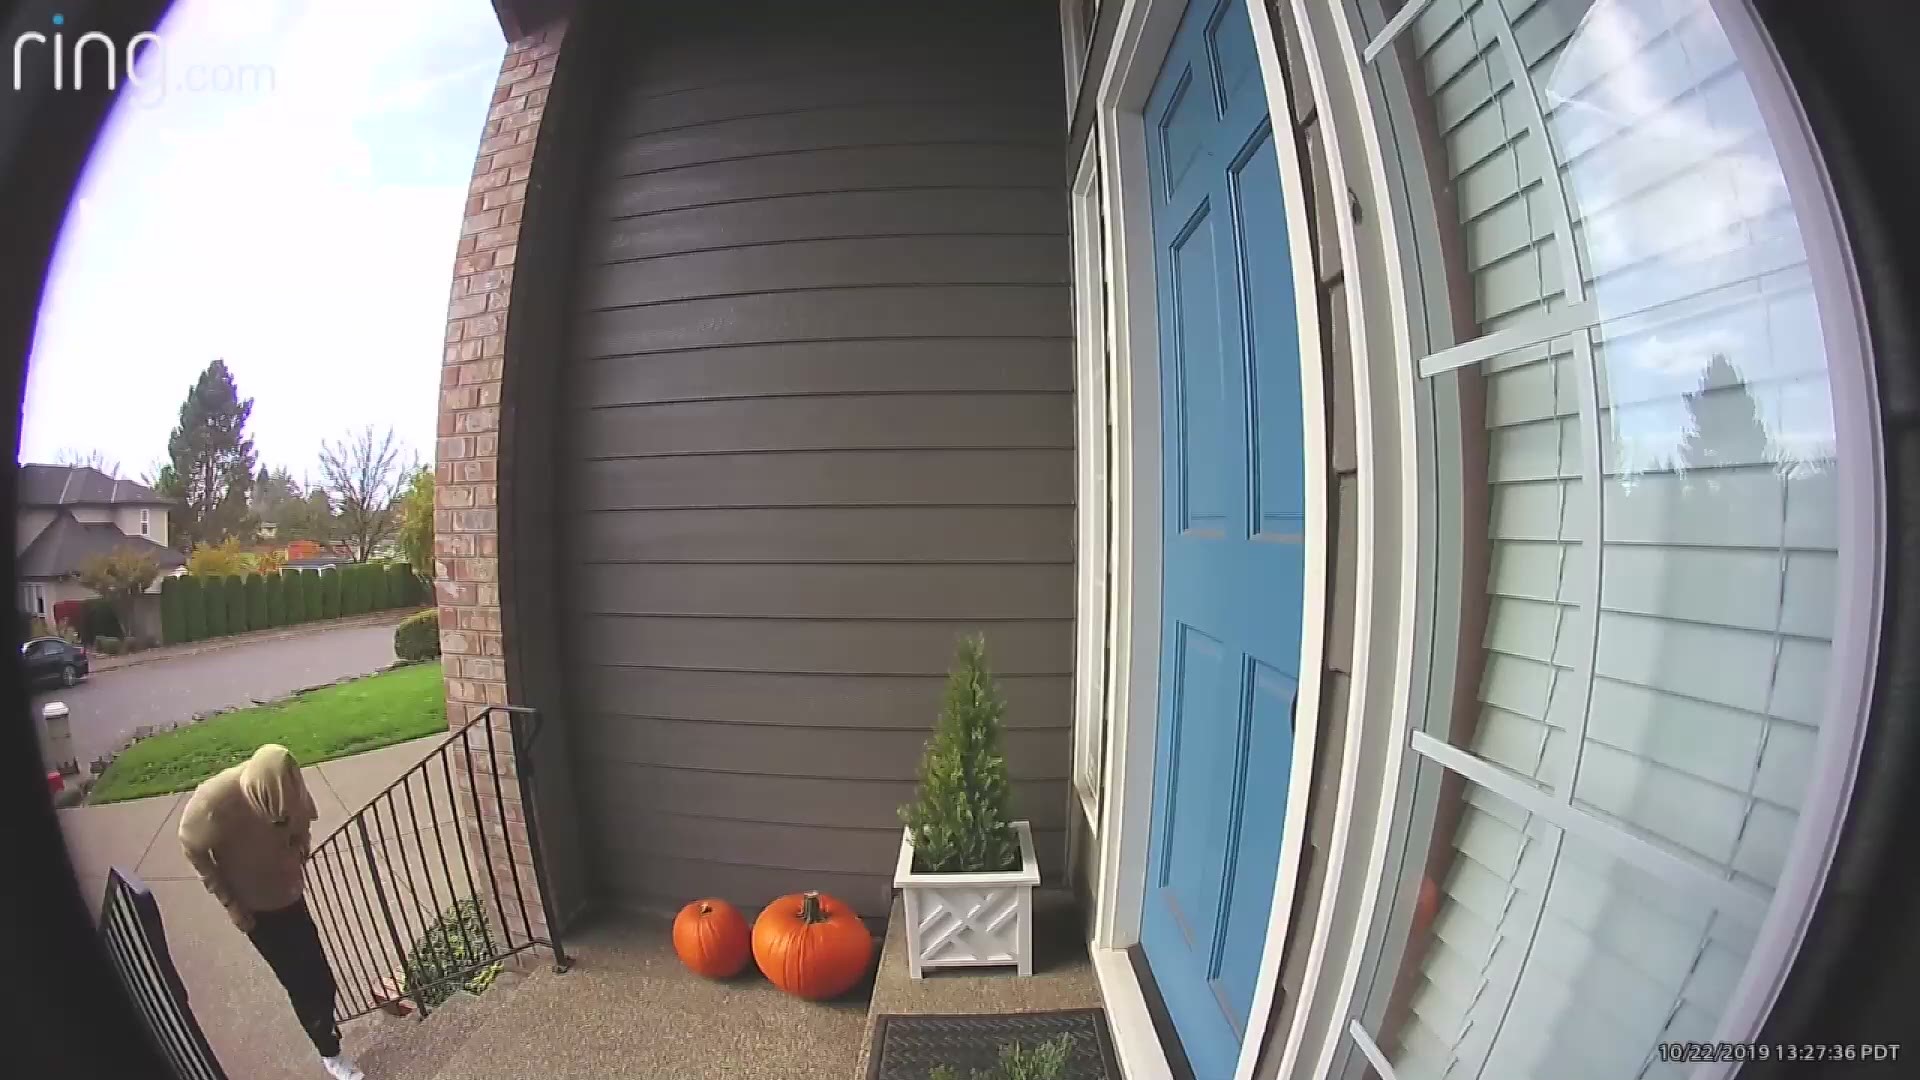 One homeowner is done with porch pirates stealing packages. And payback comes with a strong odor. You could even says he's causing a big "stink" about it.